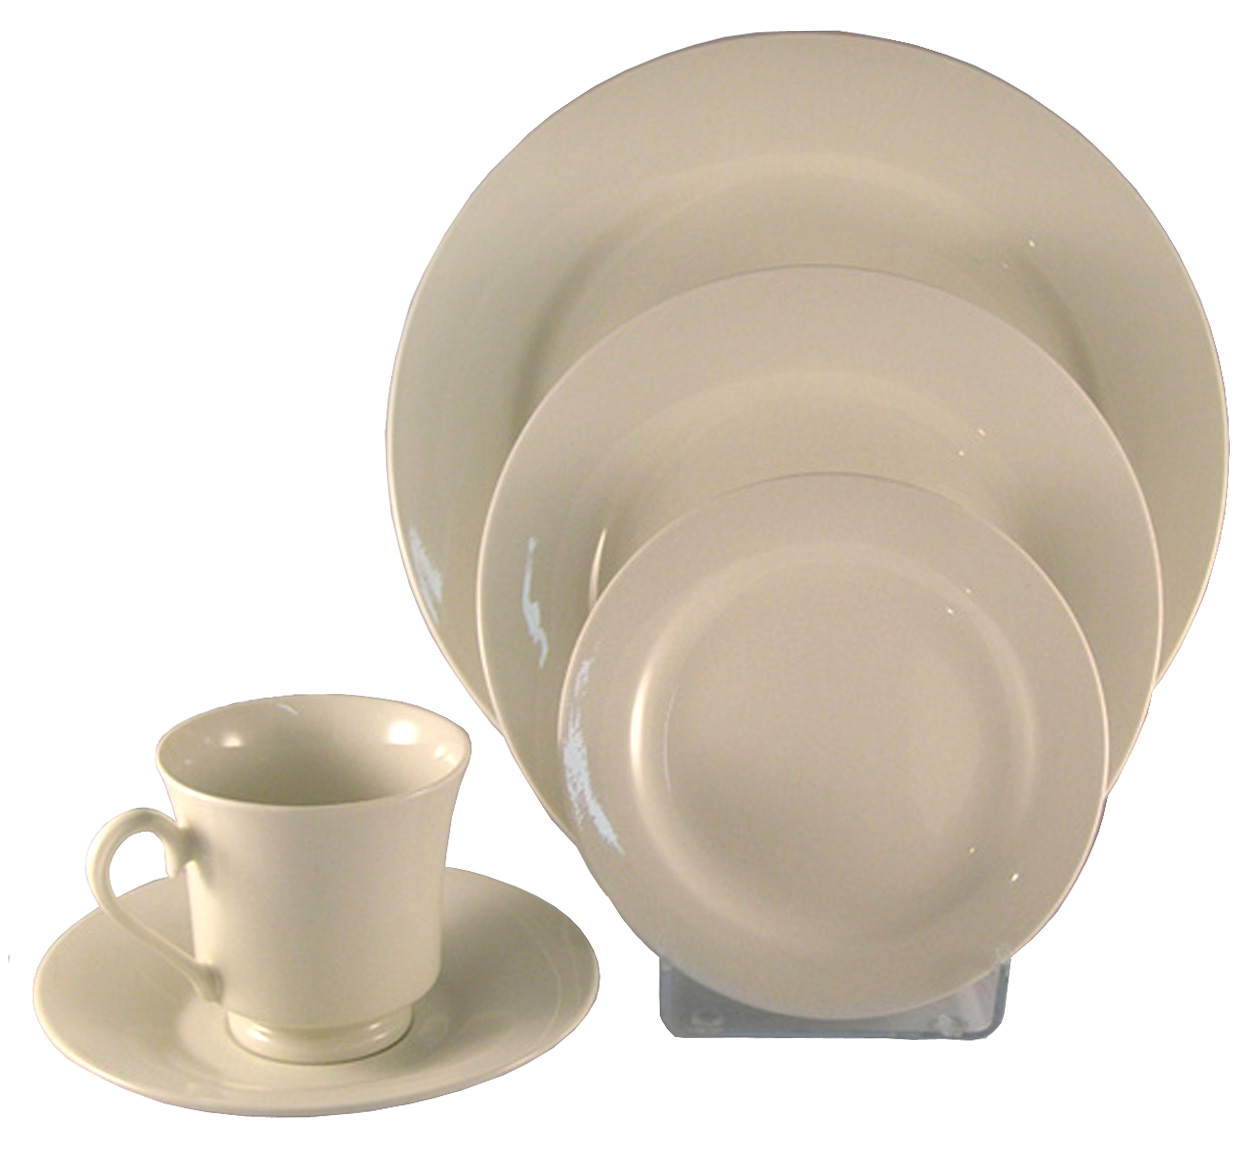 10.75 inch plate